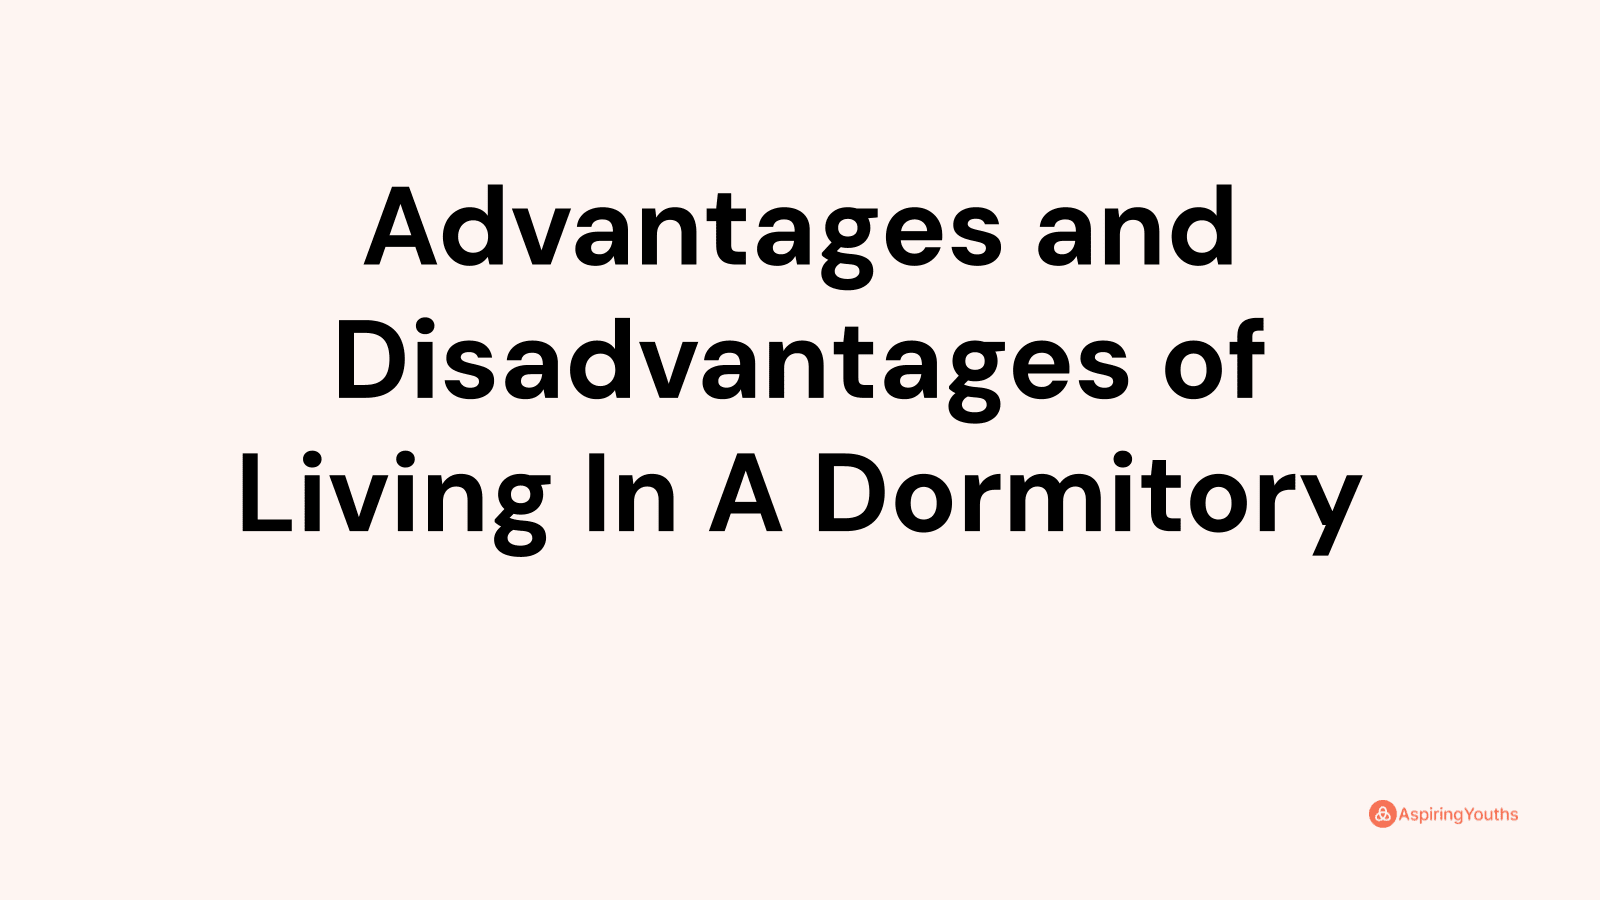 Advantages and disadvantages of Living In A Dormitory